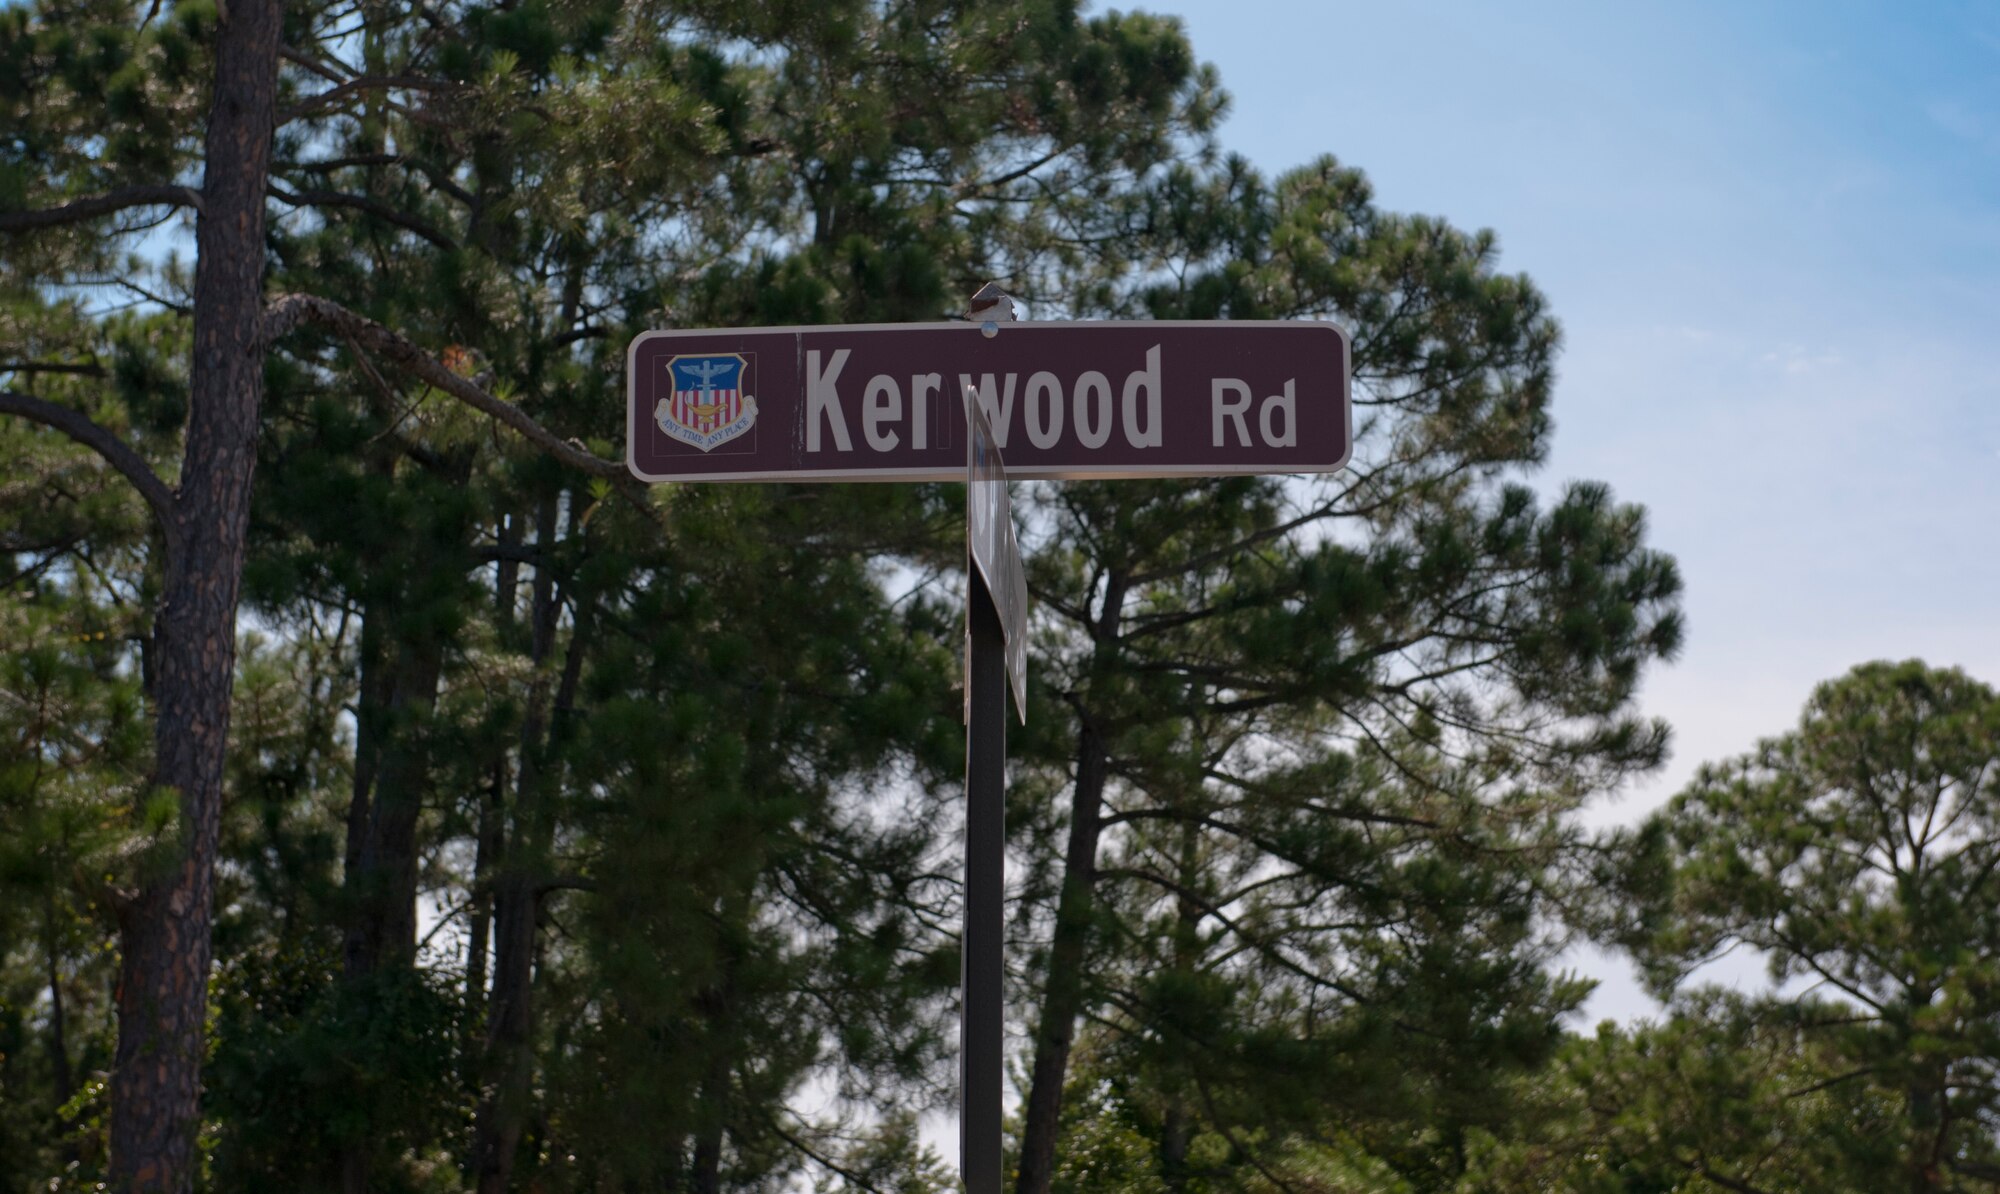 The Kerwood Gate is located on Kerwood Road, which is close to the Hurlburt Field commissary and exchange. The gate is open to all personnel Monday through Friday, excluding family and safety days, from 3:30-6:00 p.m. for outbound traffic only. (U.S. Air Force photo/Senior Airman Krystal Garrett)